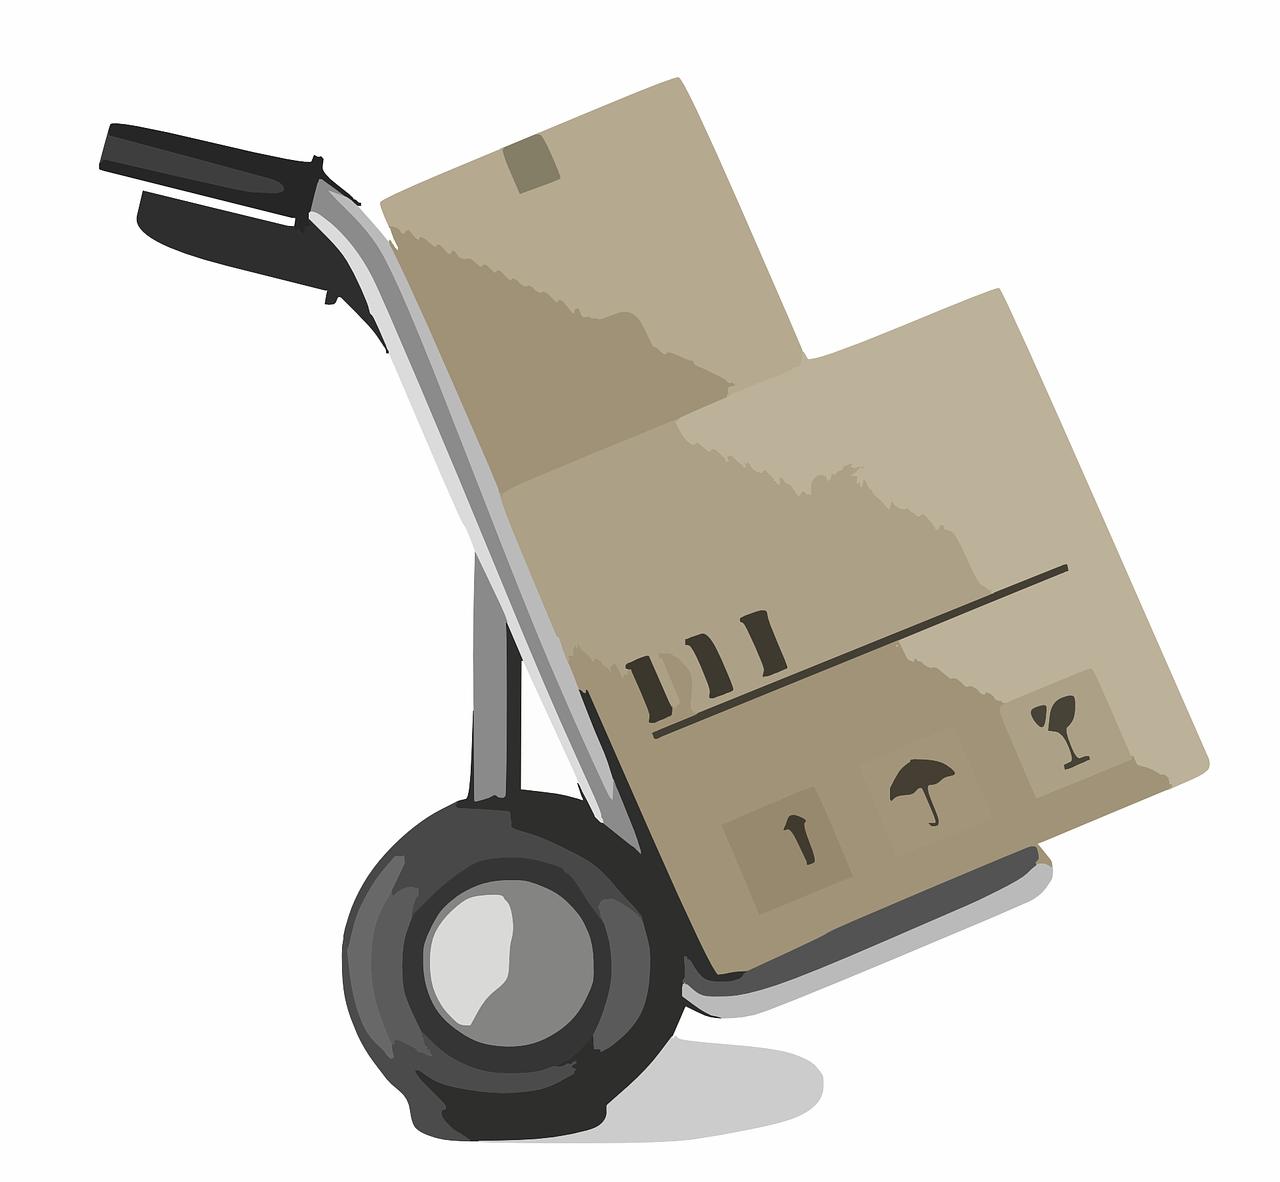 Buy freight if, for example, you need to resend a package.